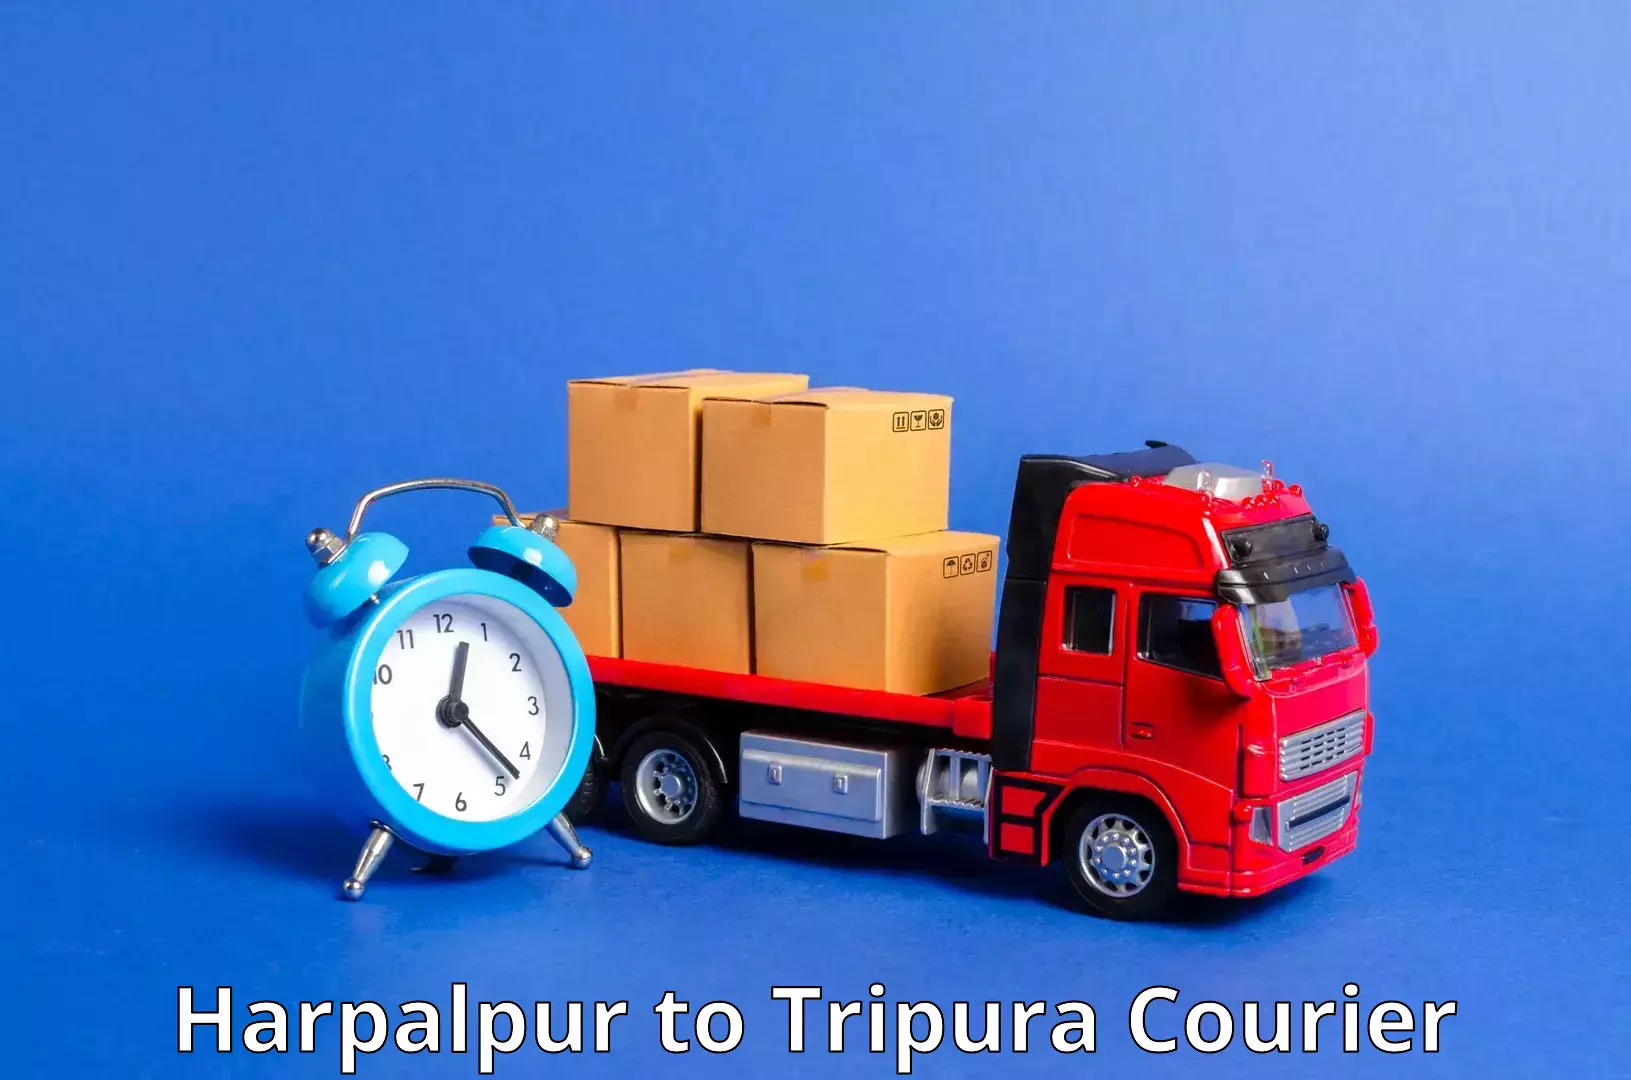 24/7 courier service in Harpalpur to Agartala